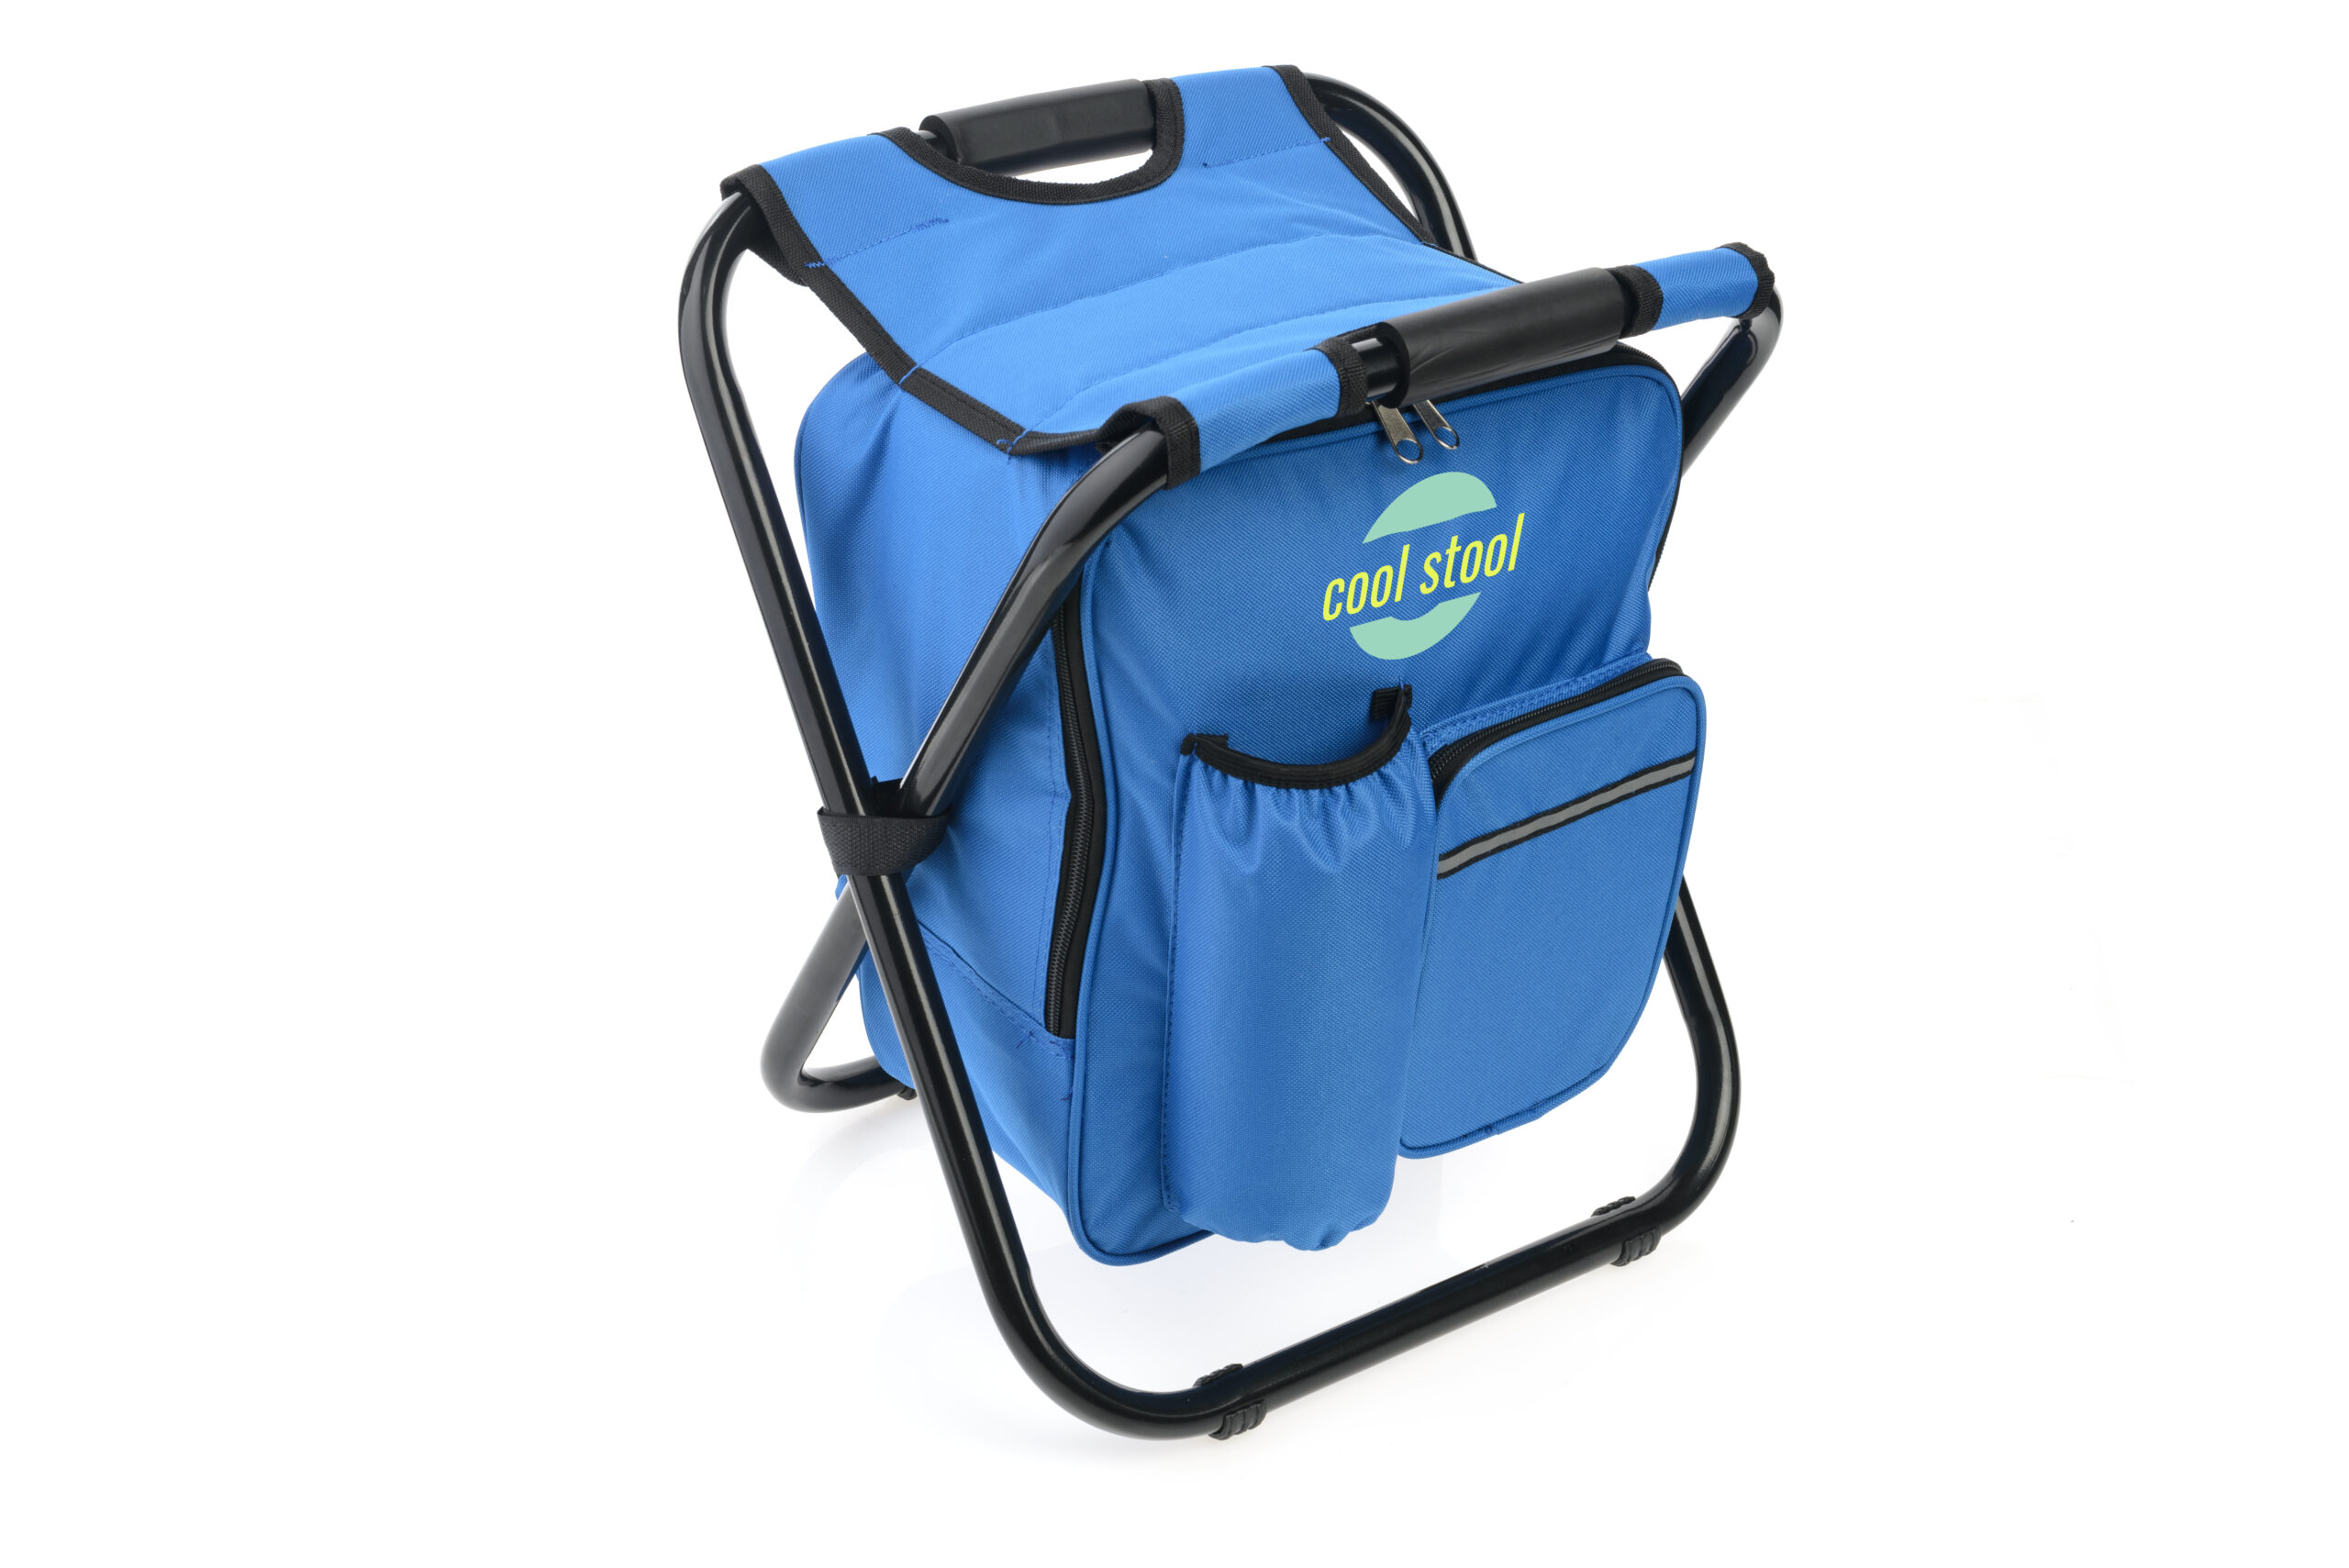 COOL STOOL BACKPACK - 3P Experts